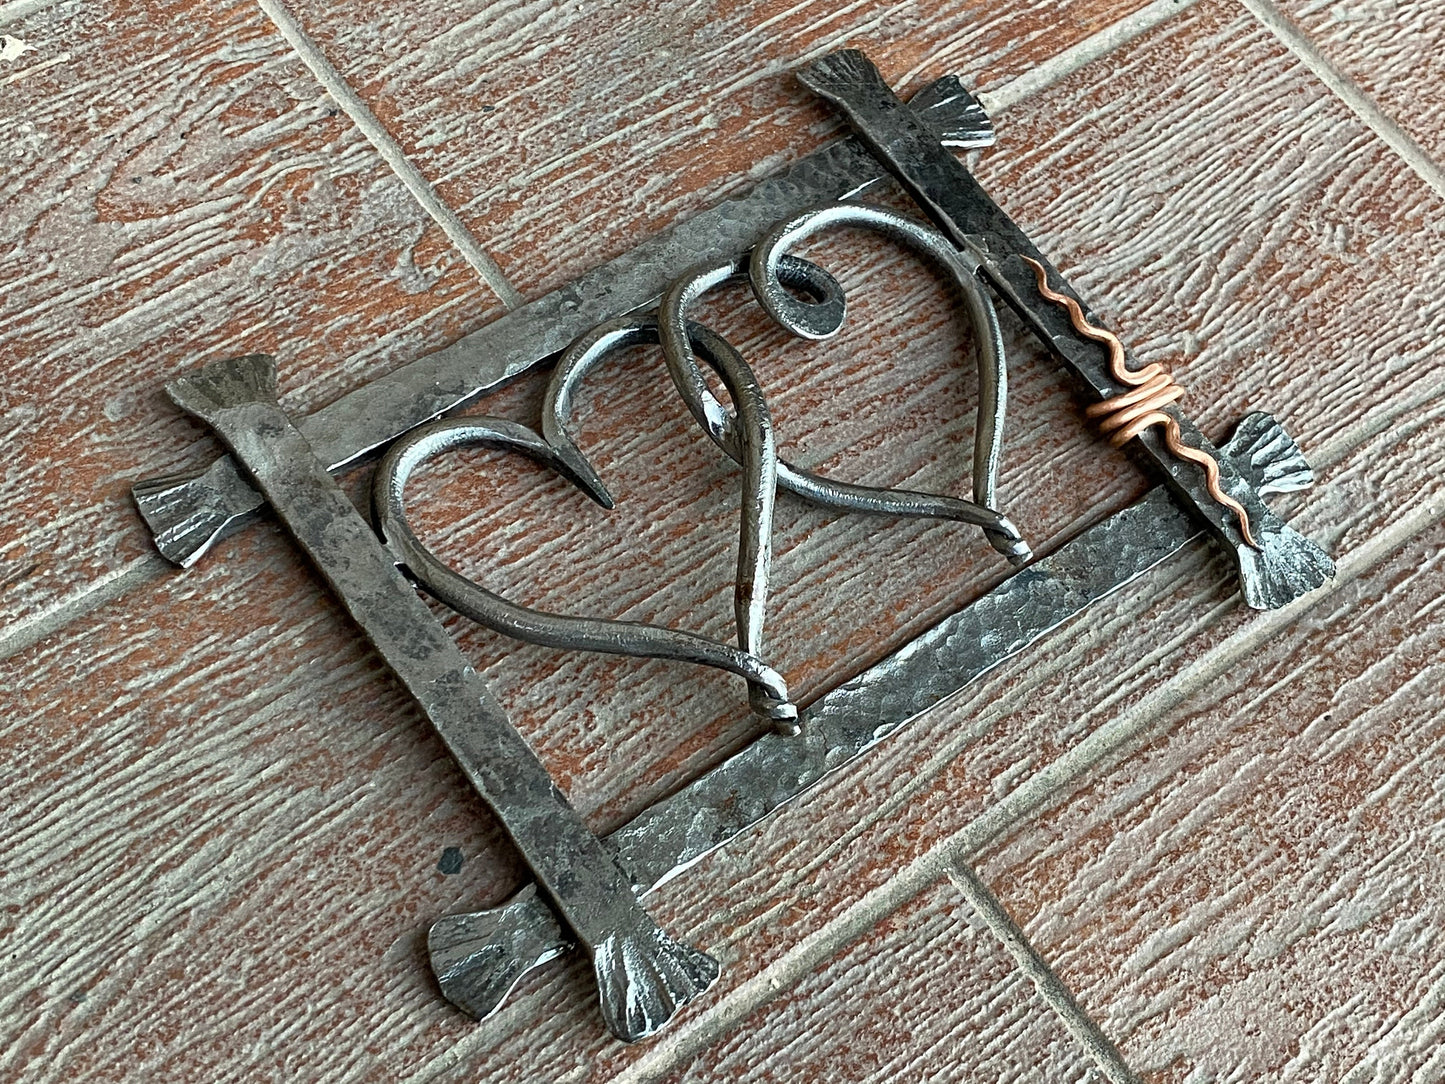 Iron hearts, 6th anniversary, iron gift for him, iron anniversary, iron gift,6 year anniversary,iron gift idea,personalized gift, steel gift